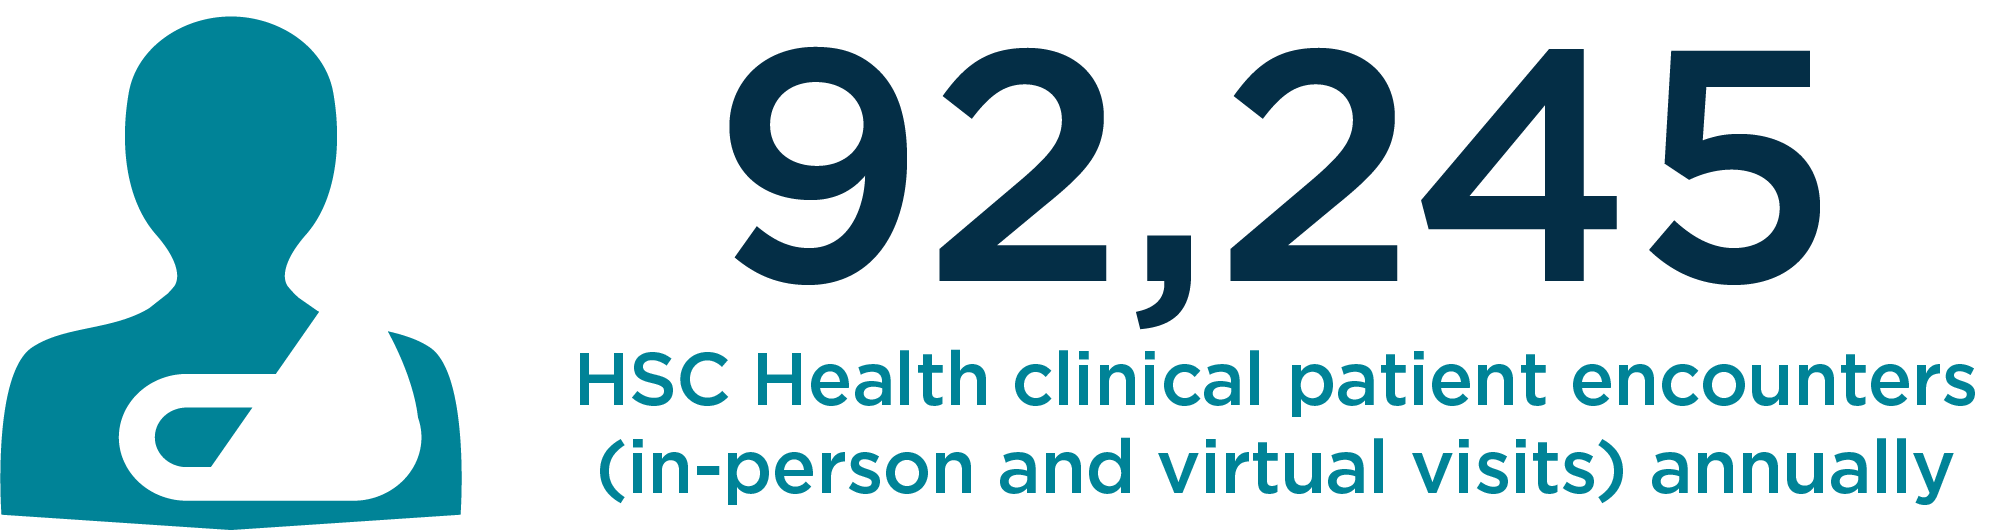 92, 245 HSC Health clinical patient encounters annually